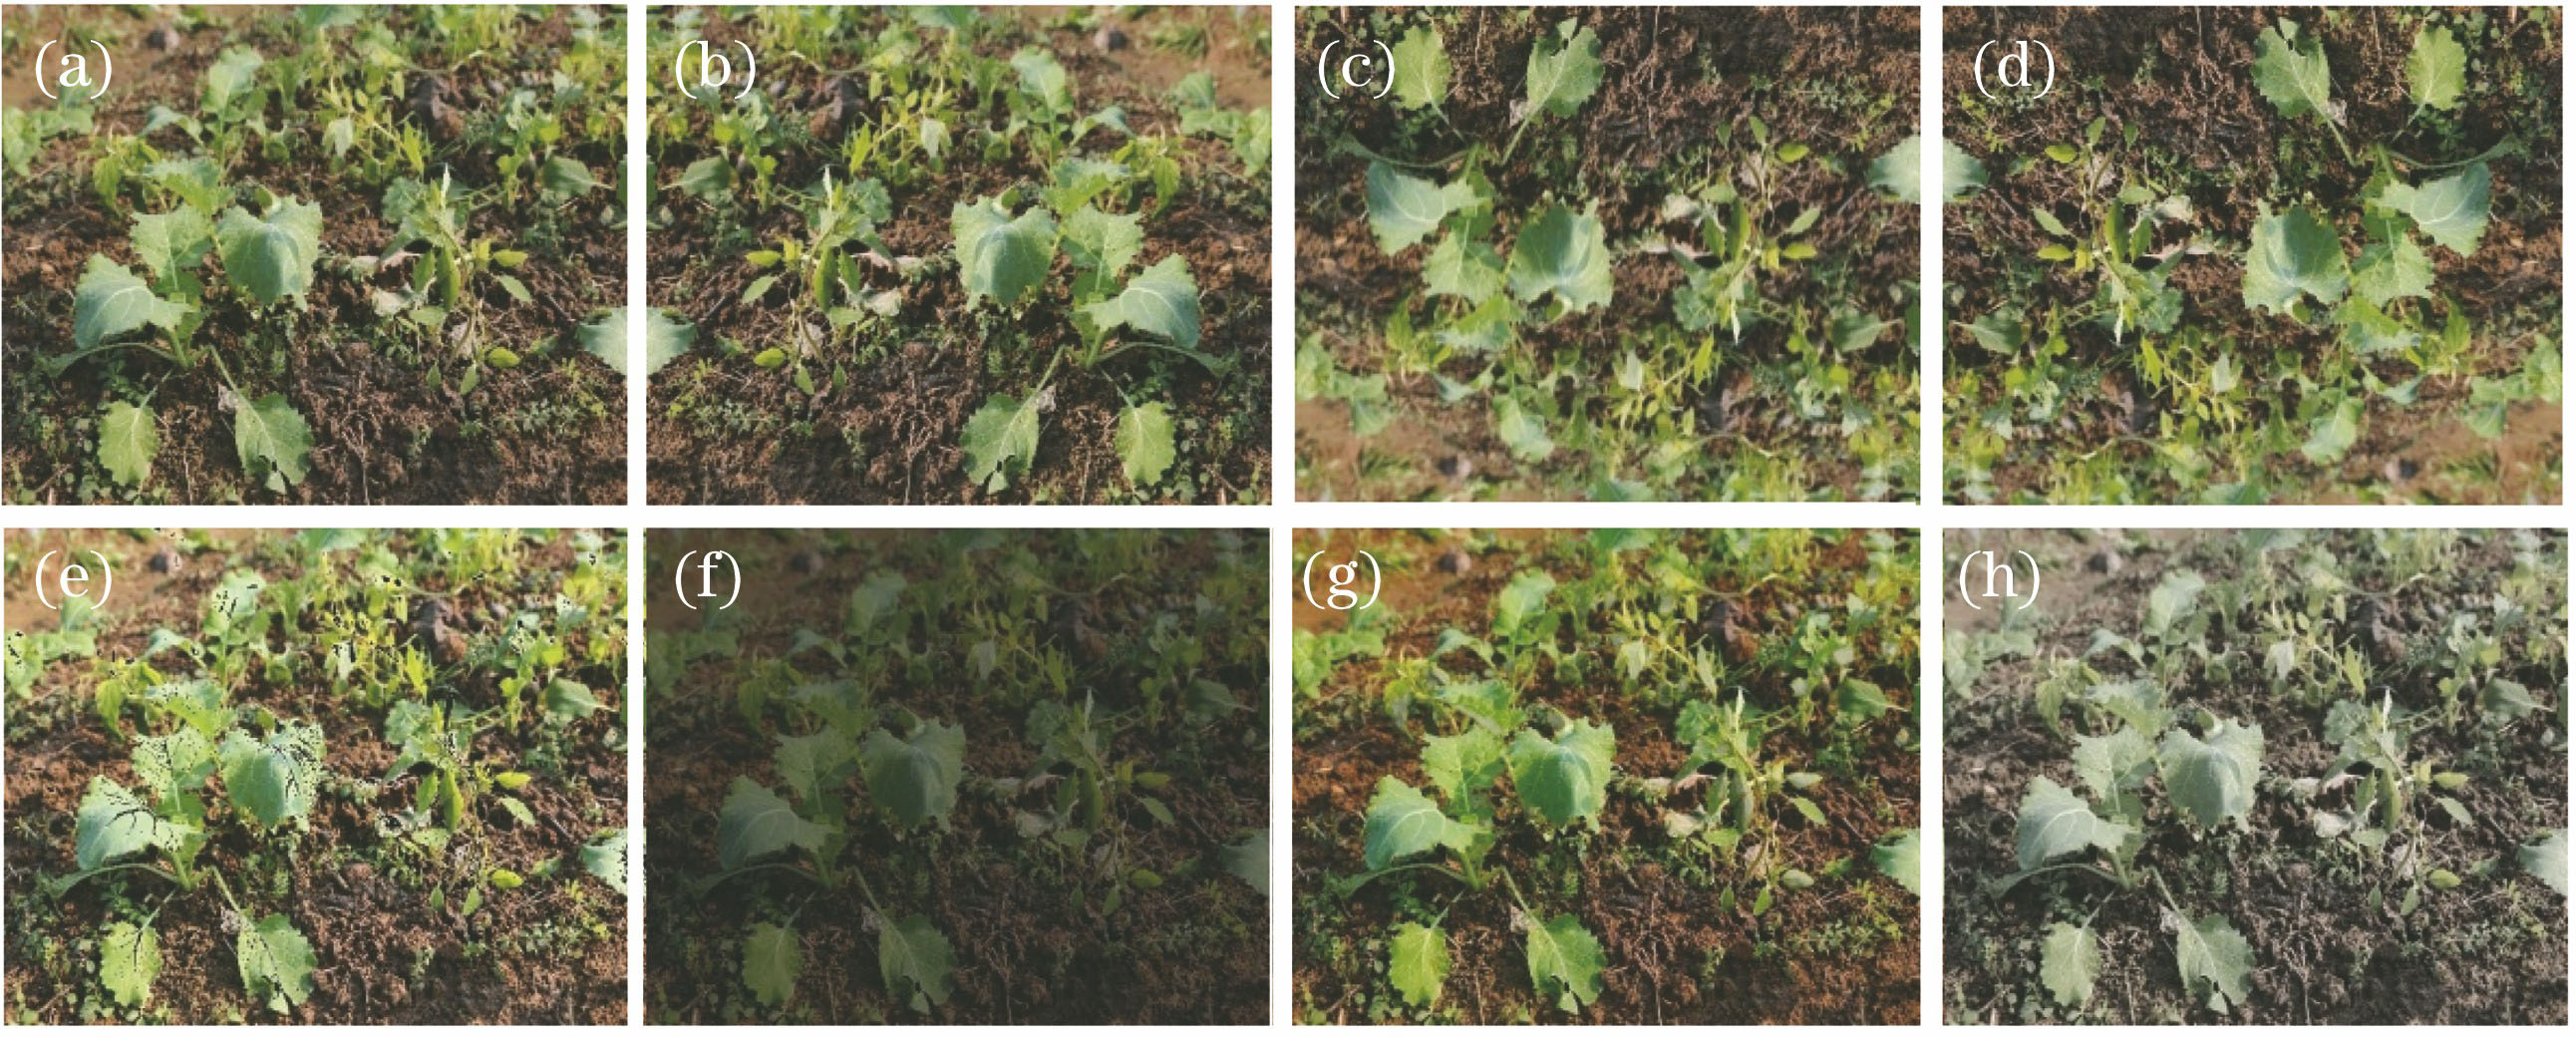 Results of image data enhancement. (a) Mixed image of rapeseed and weeds; (b) horizontally flipped image; (c) vertically flipped image; (d) horizontally and vertically flipped image; (e) brightness-enhanced image; (f) brightness-reduced image; (g) saturation-enhanced image; (h) saturation reduced image